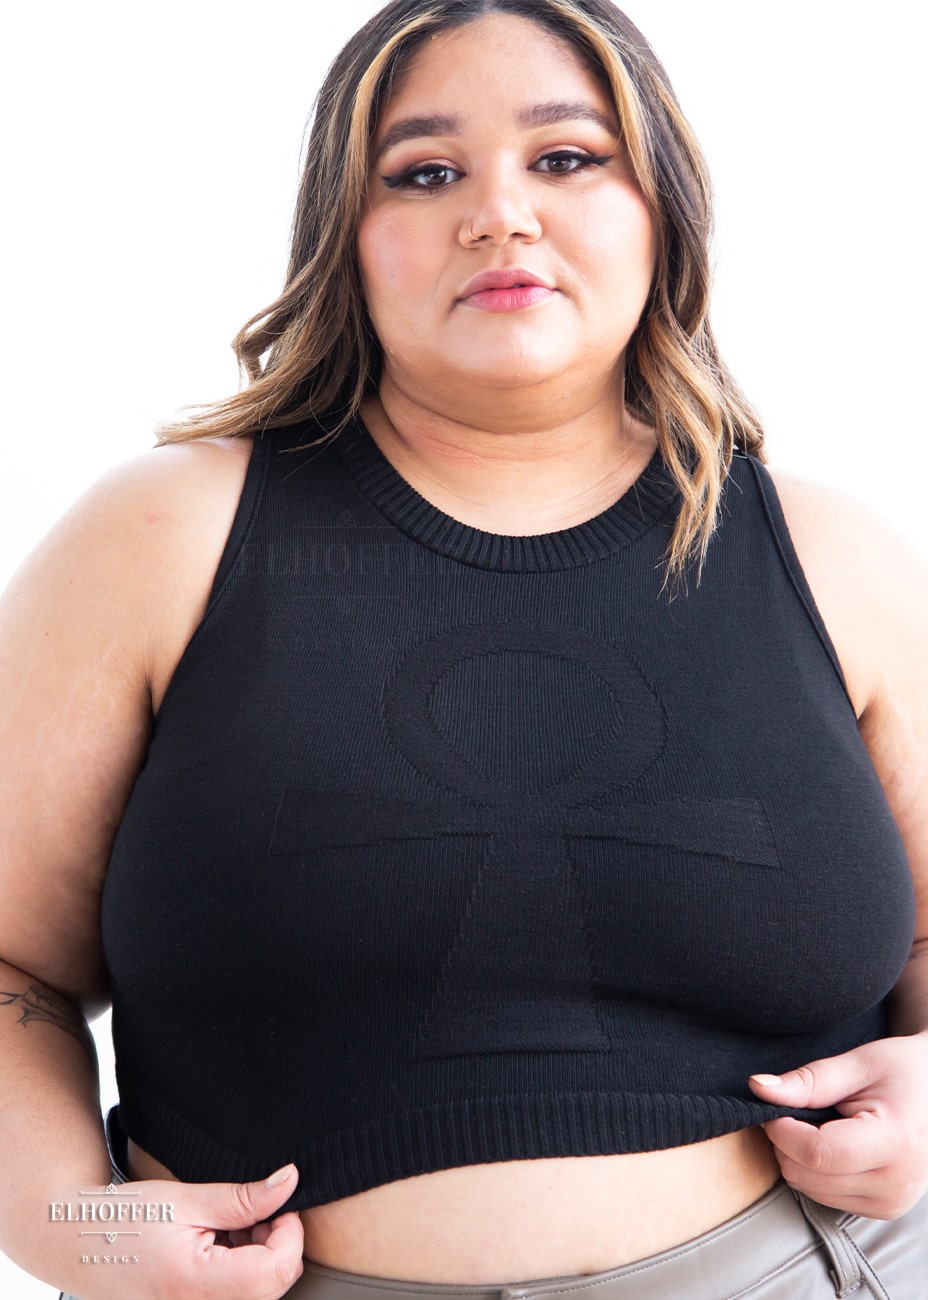 Cori, a sun kissed skinned 2xl model with long balayage hair, is wearing a sleeveless knit crop top with a large subtle ankh design on the front.